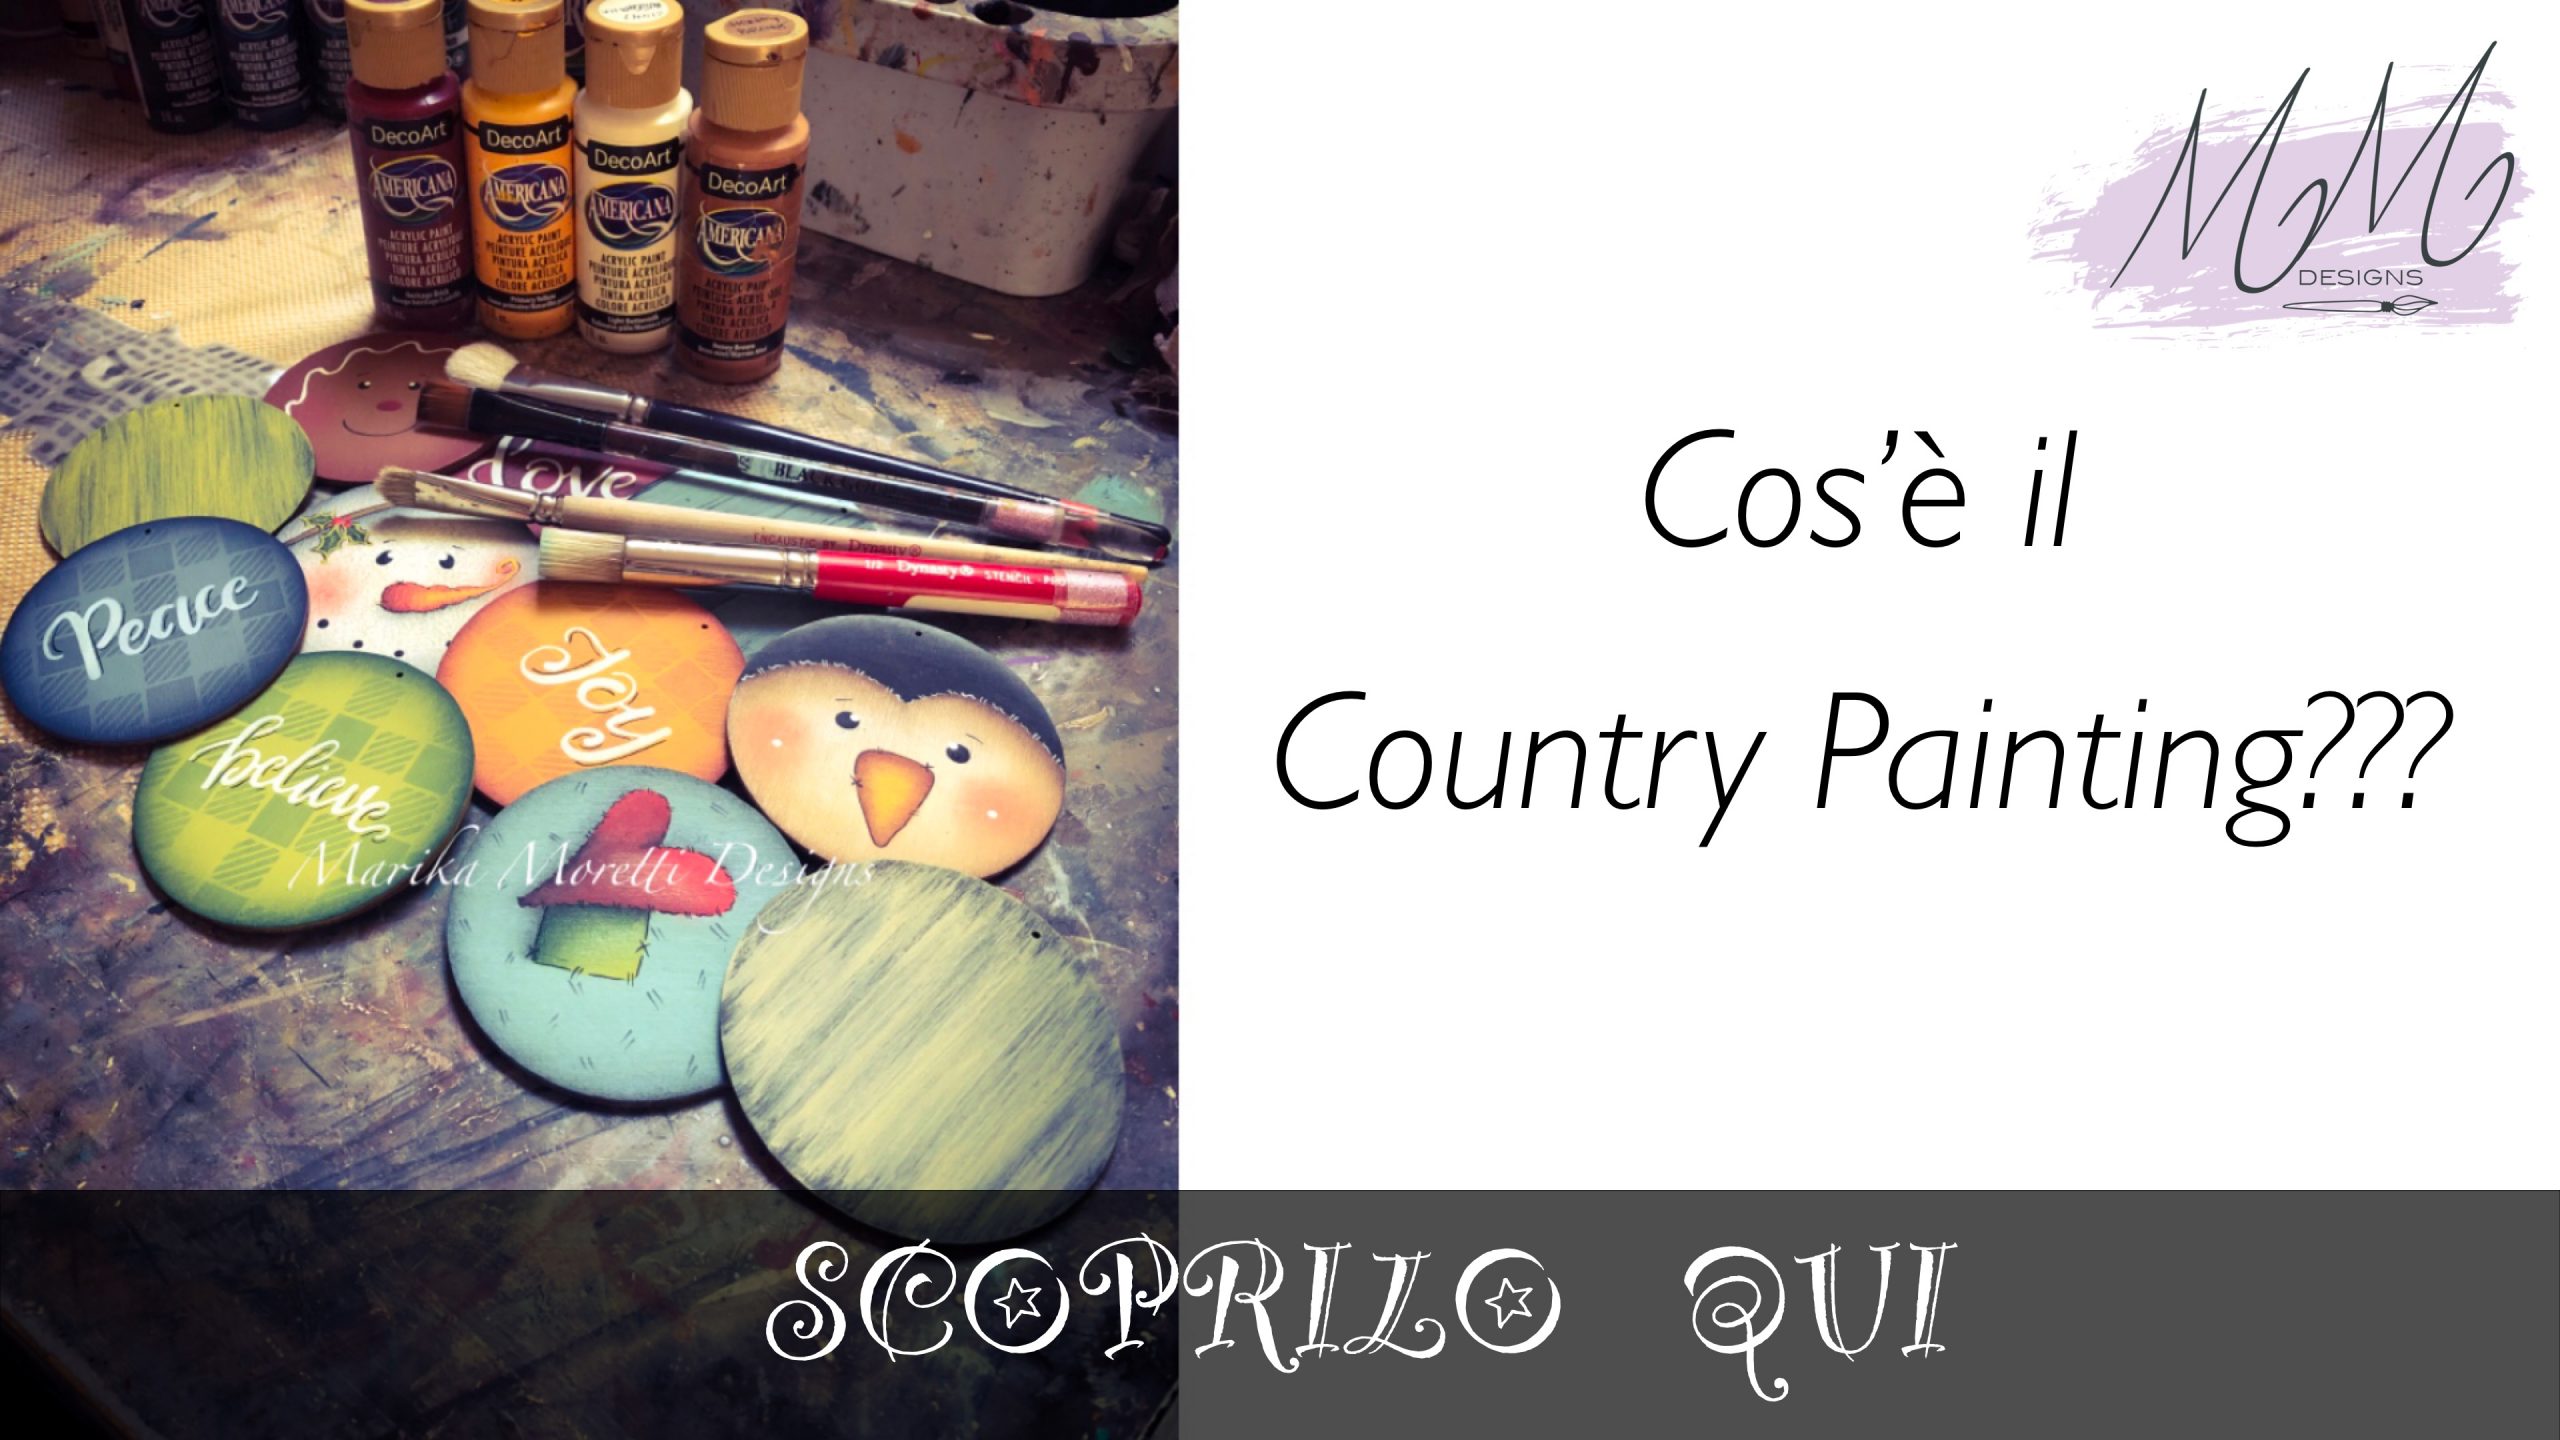 Country Painting stile pittura